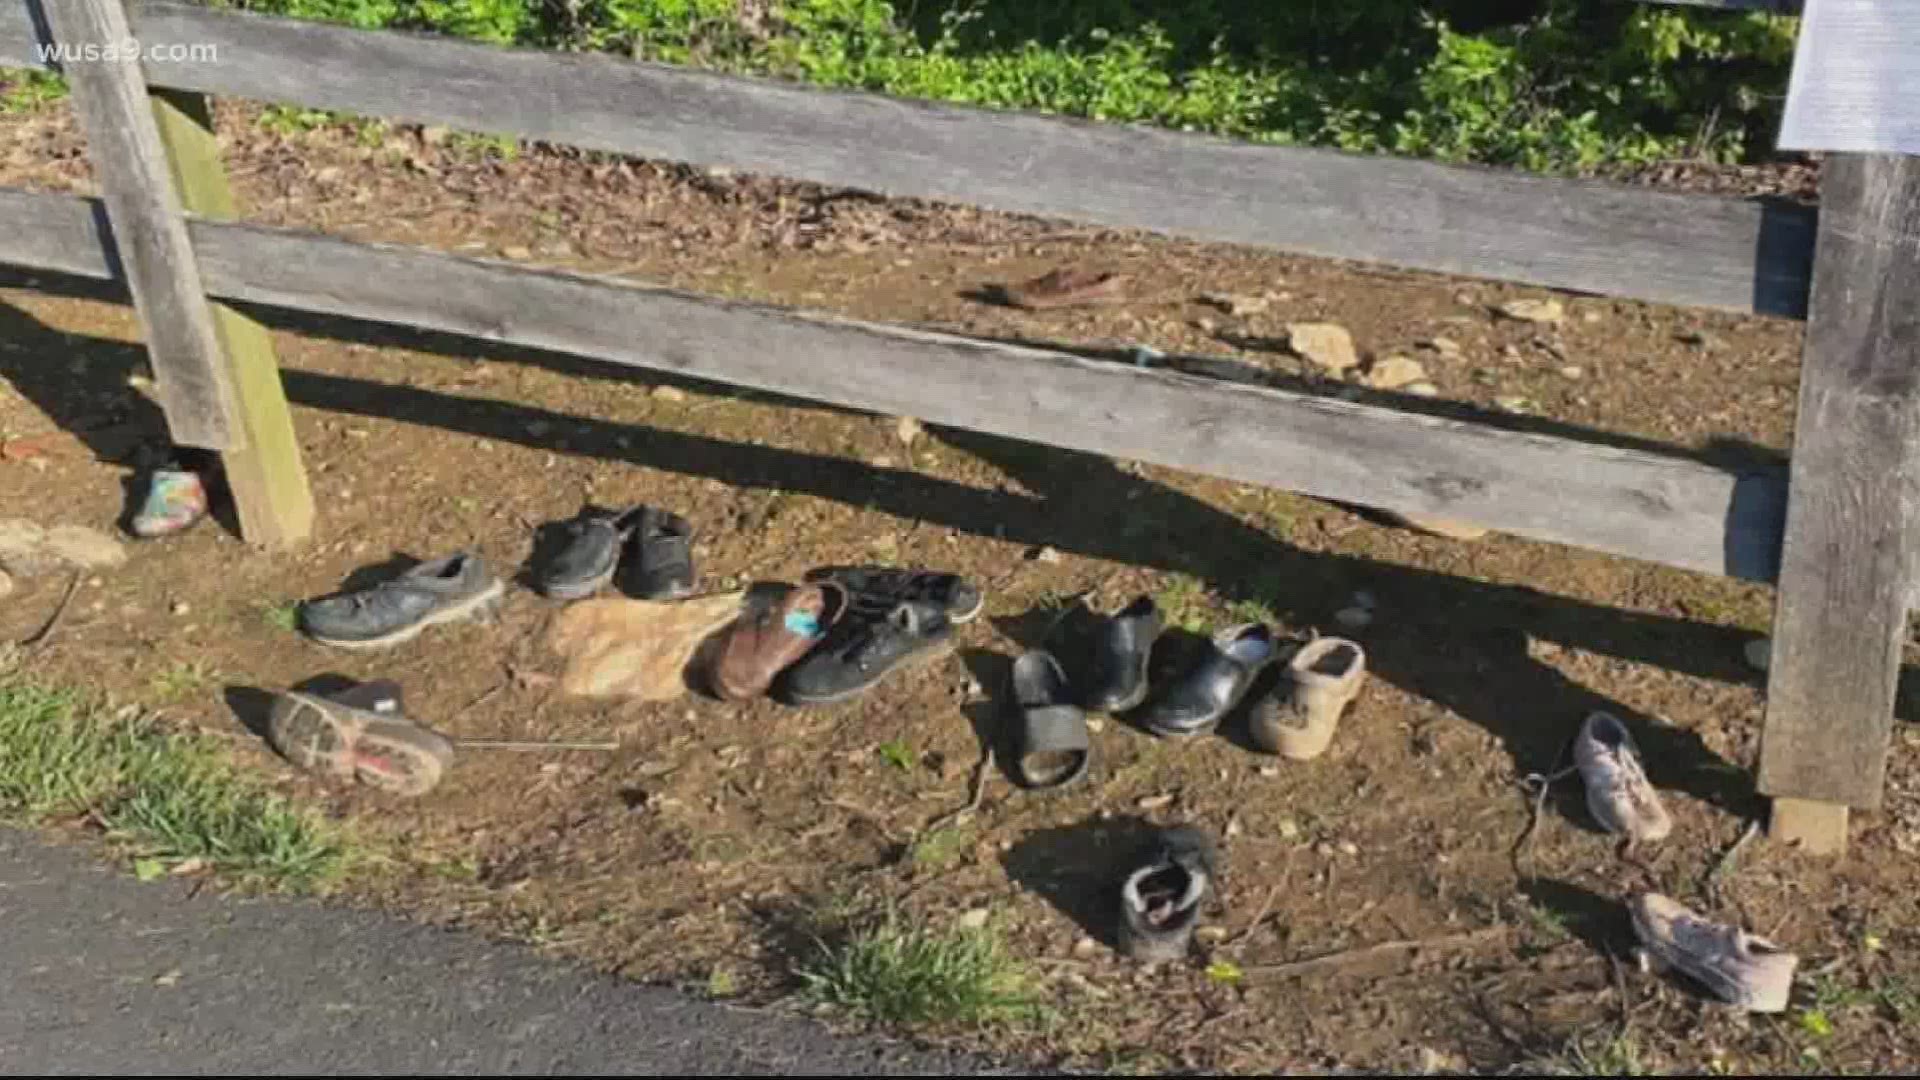 Apparently, foxes using shoes as toys can be common. 12 shoes have been found at four fox holes recently, with only one complete pair among them.